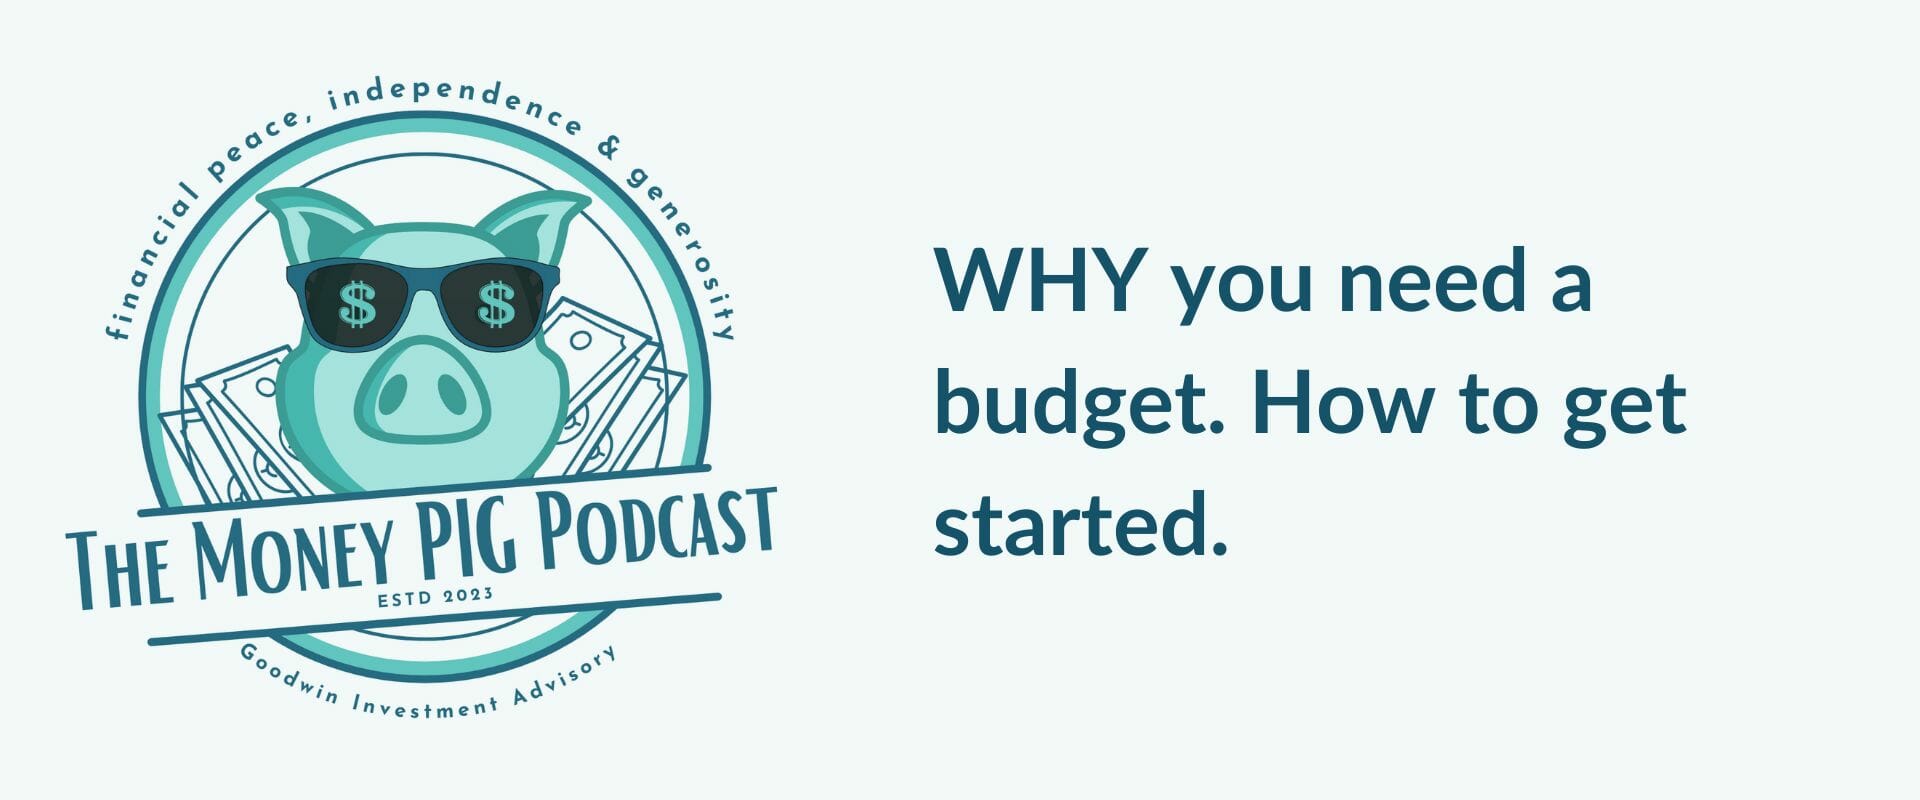 WHY you need a budget. How to get started